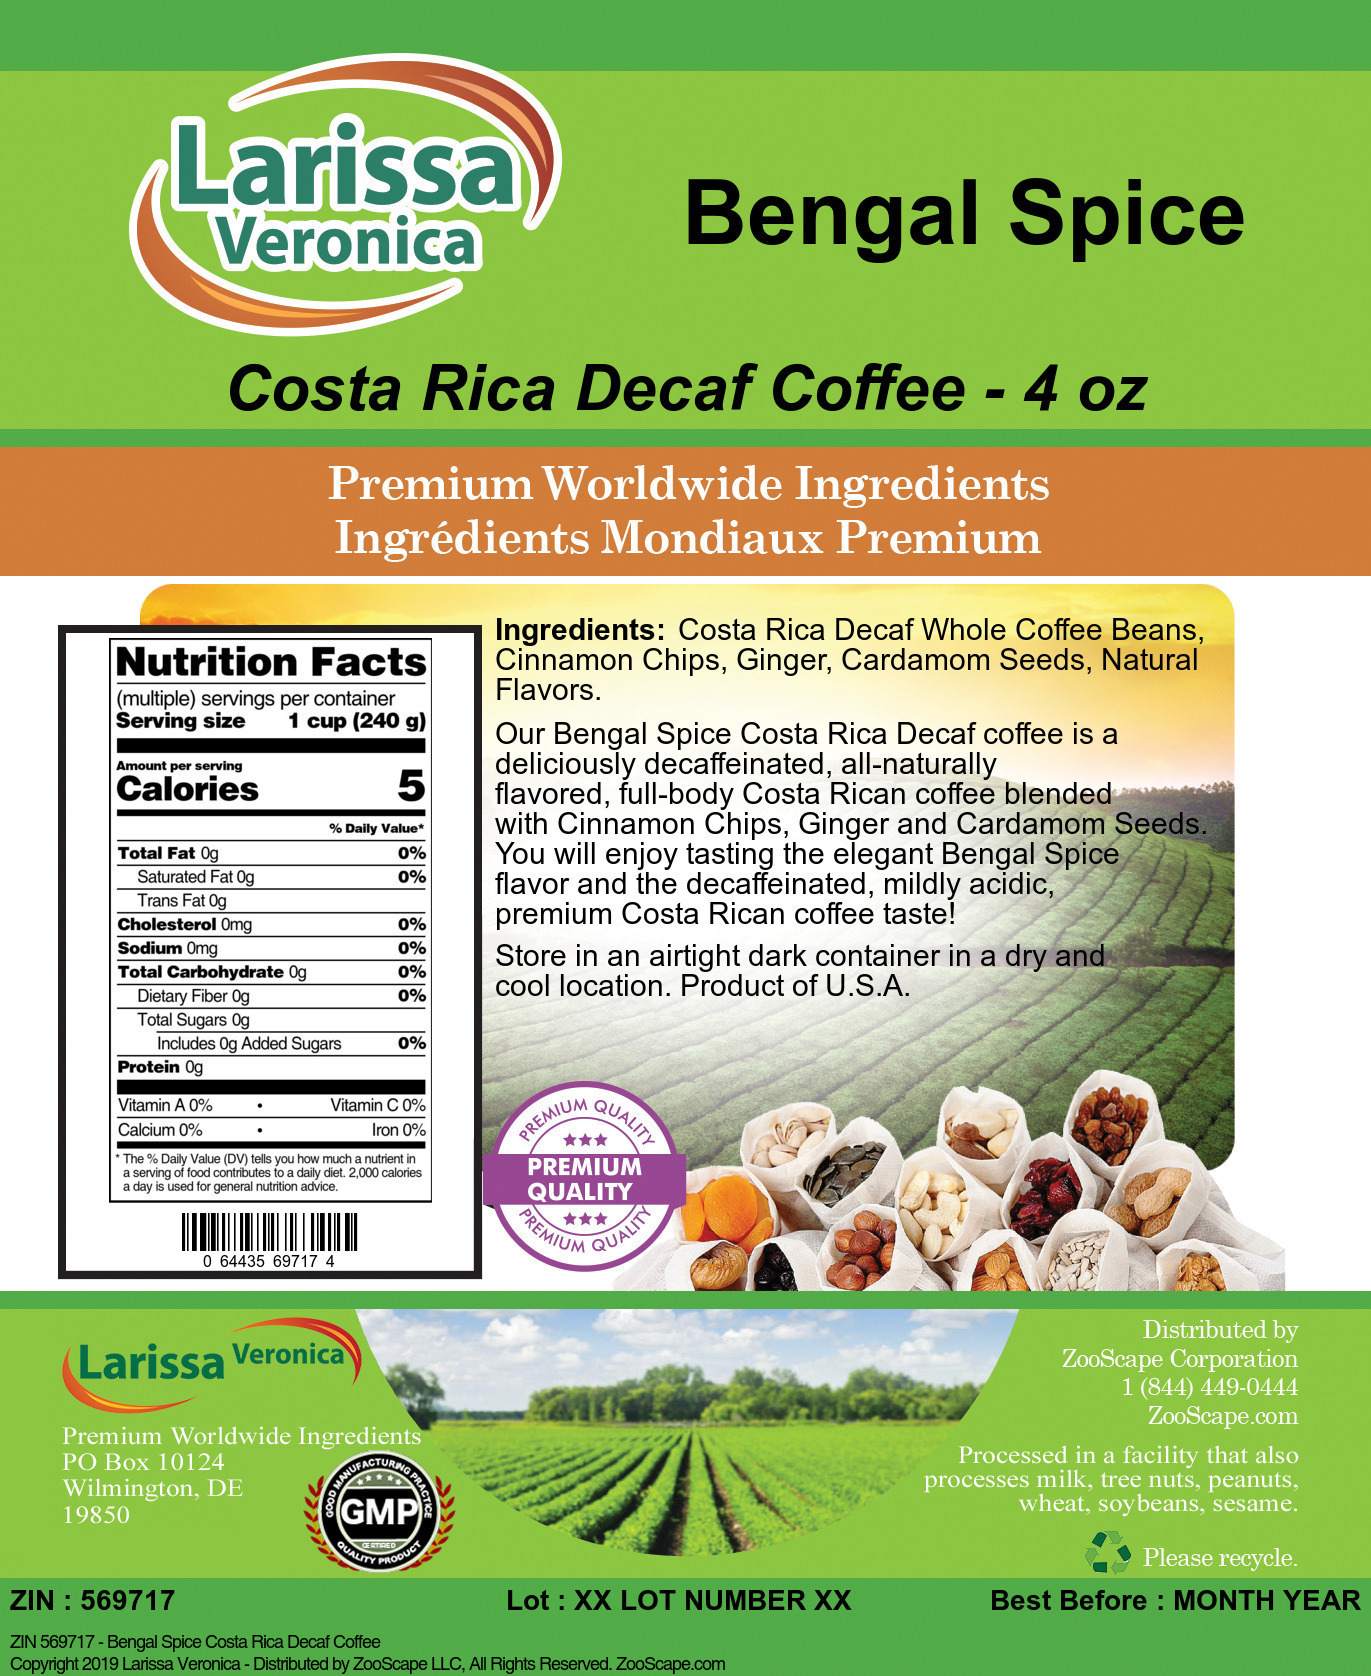 Bengal Spice Costa Rica Decaf Coffee - Label